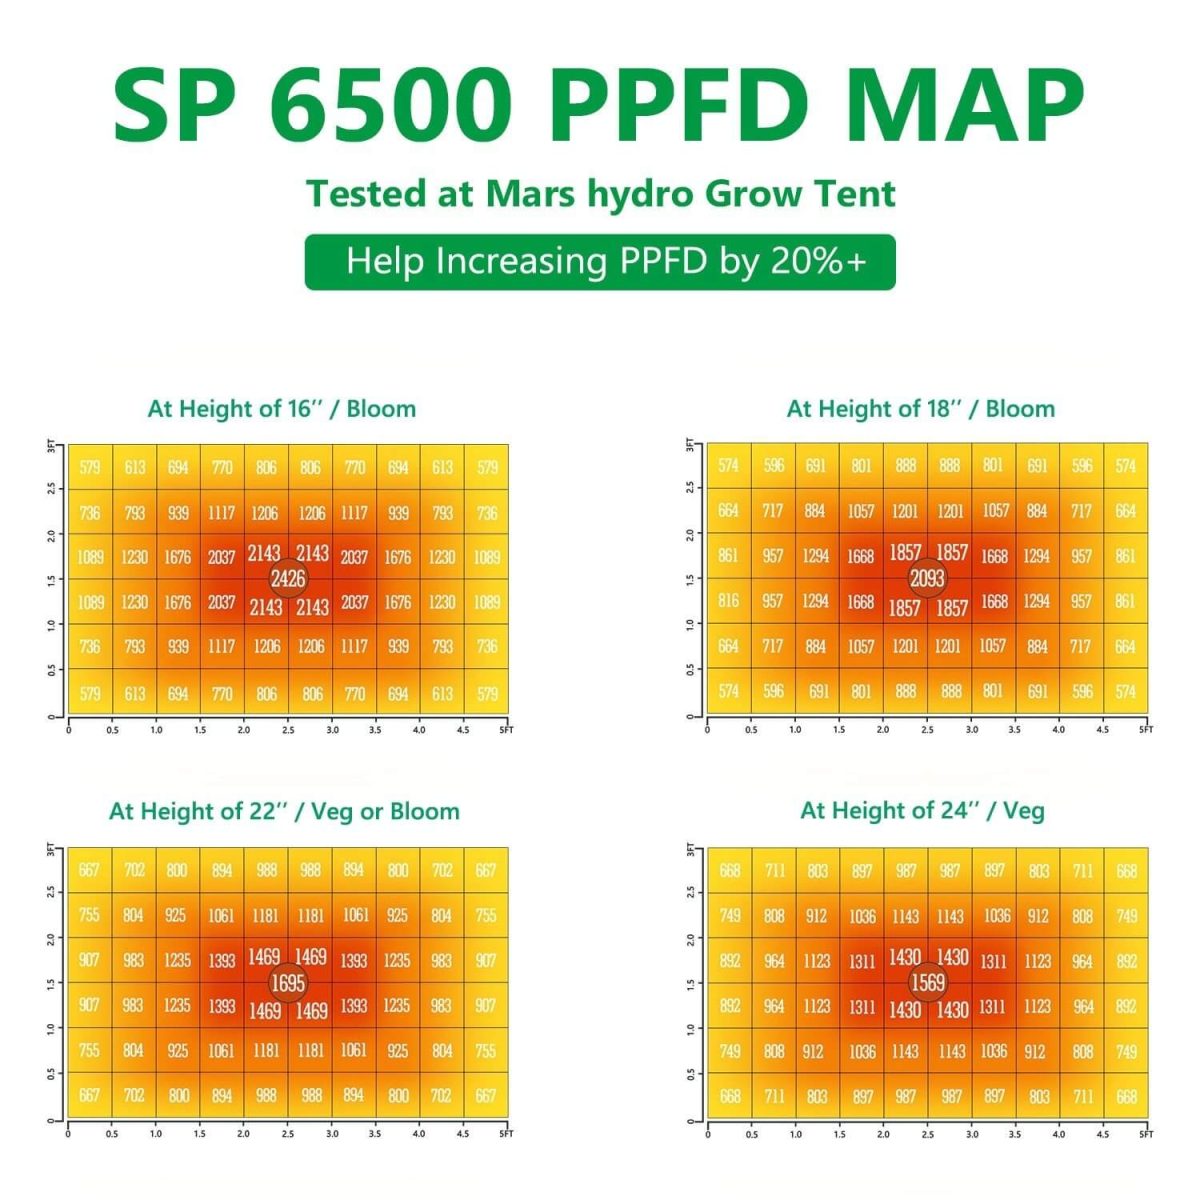 PPFD map of SP6500 , tested in Mars Hydro 2x4 grow tent at different heright 16'', 18'', 22'', 24''